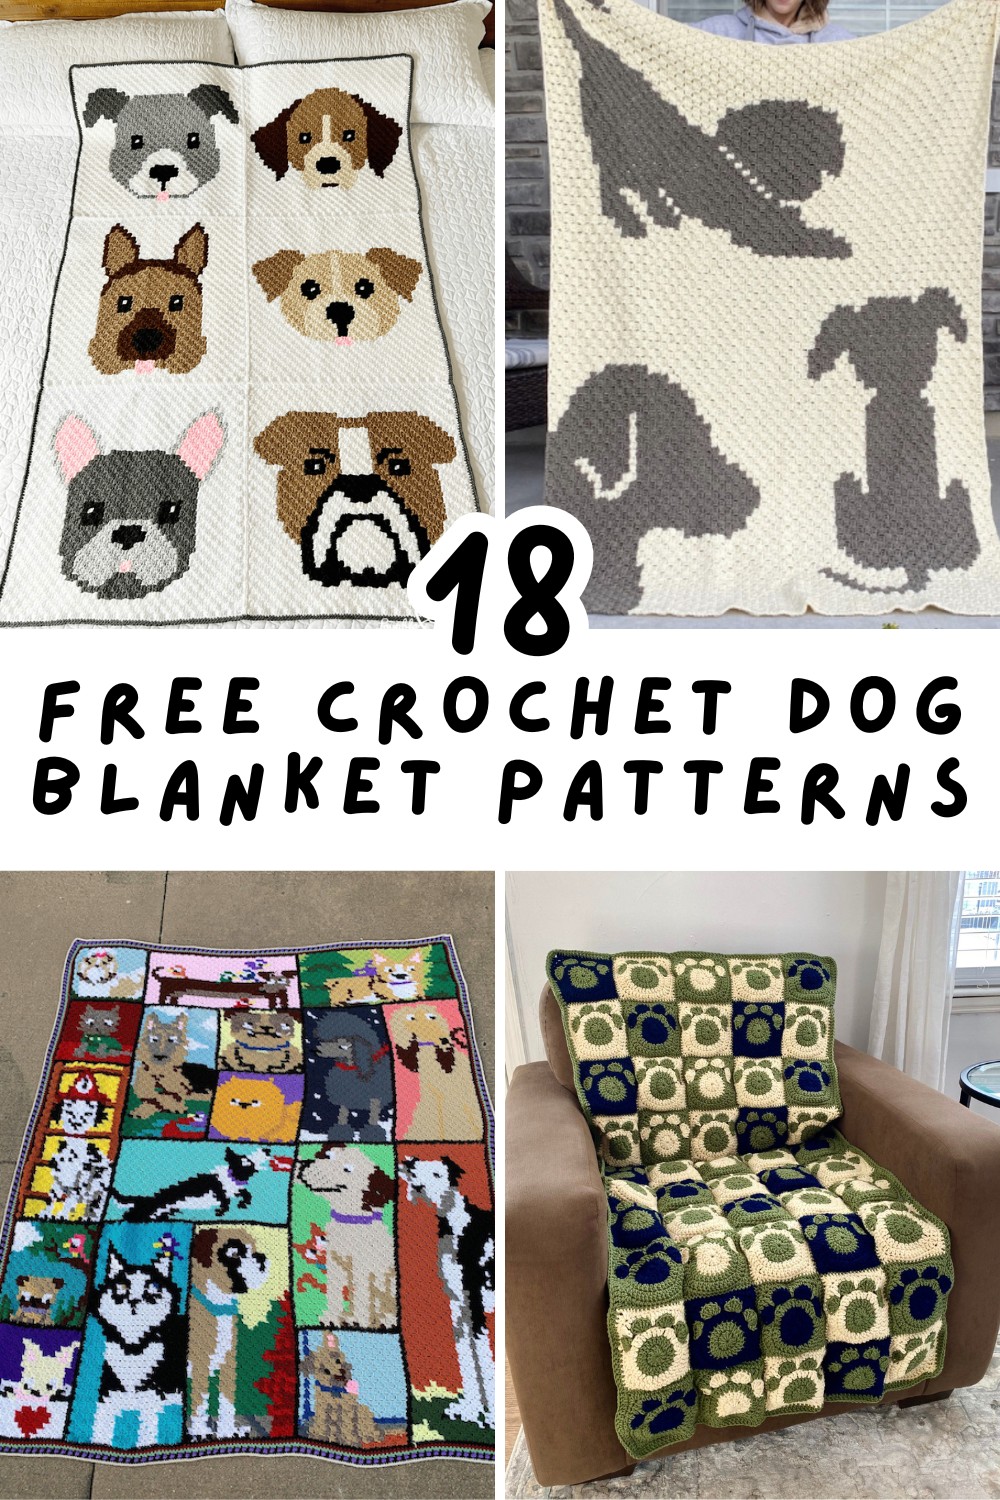 Create snuggly dog blankets with these easy crochet patterns! Perfect for pampering your pup, supporting animal shelters, or surprising a dog-loving friend. 🧶🐕 #HandmadeGifts #CrochetLove